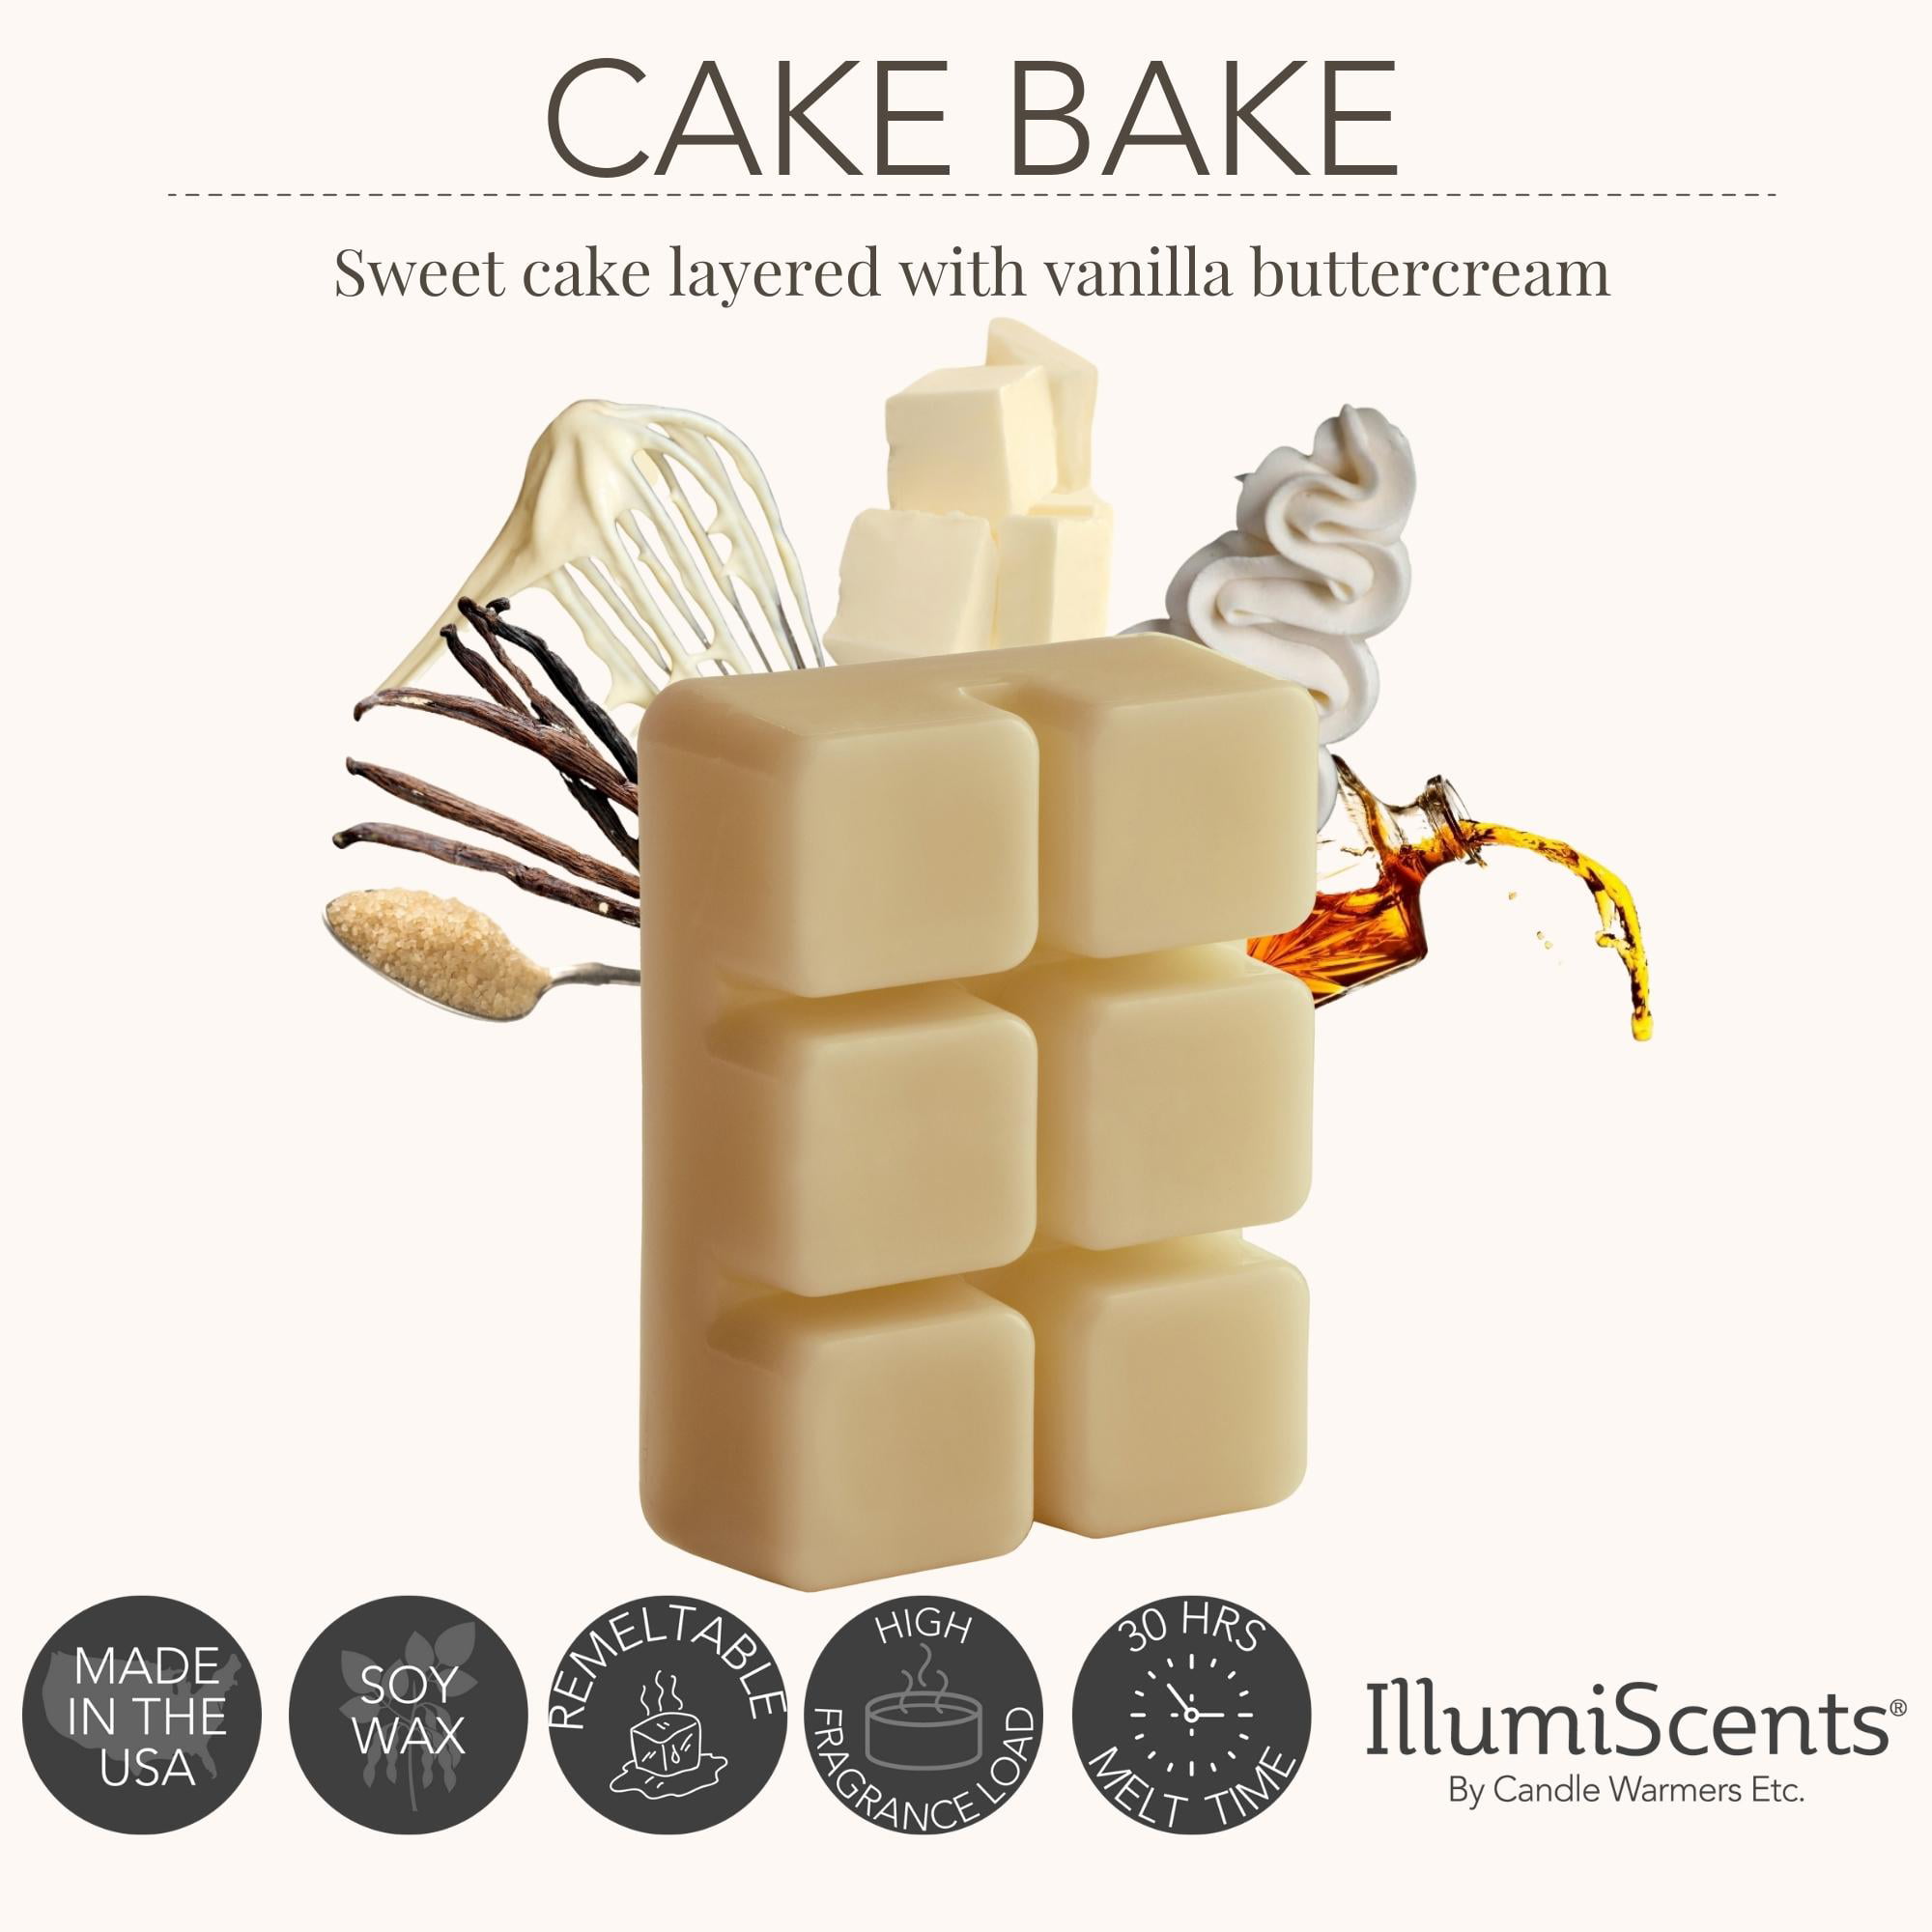 IllumiScents by Candle Warmers Wax Melts Reviews